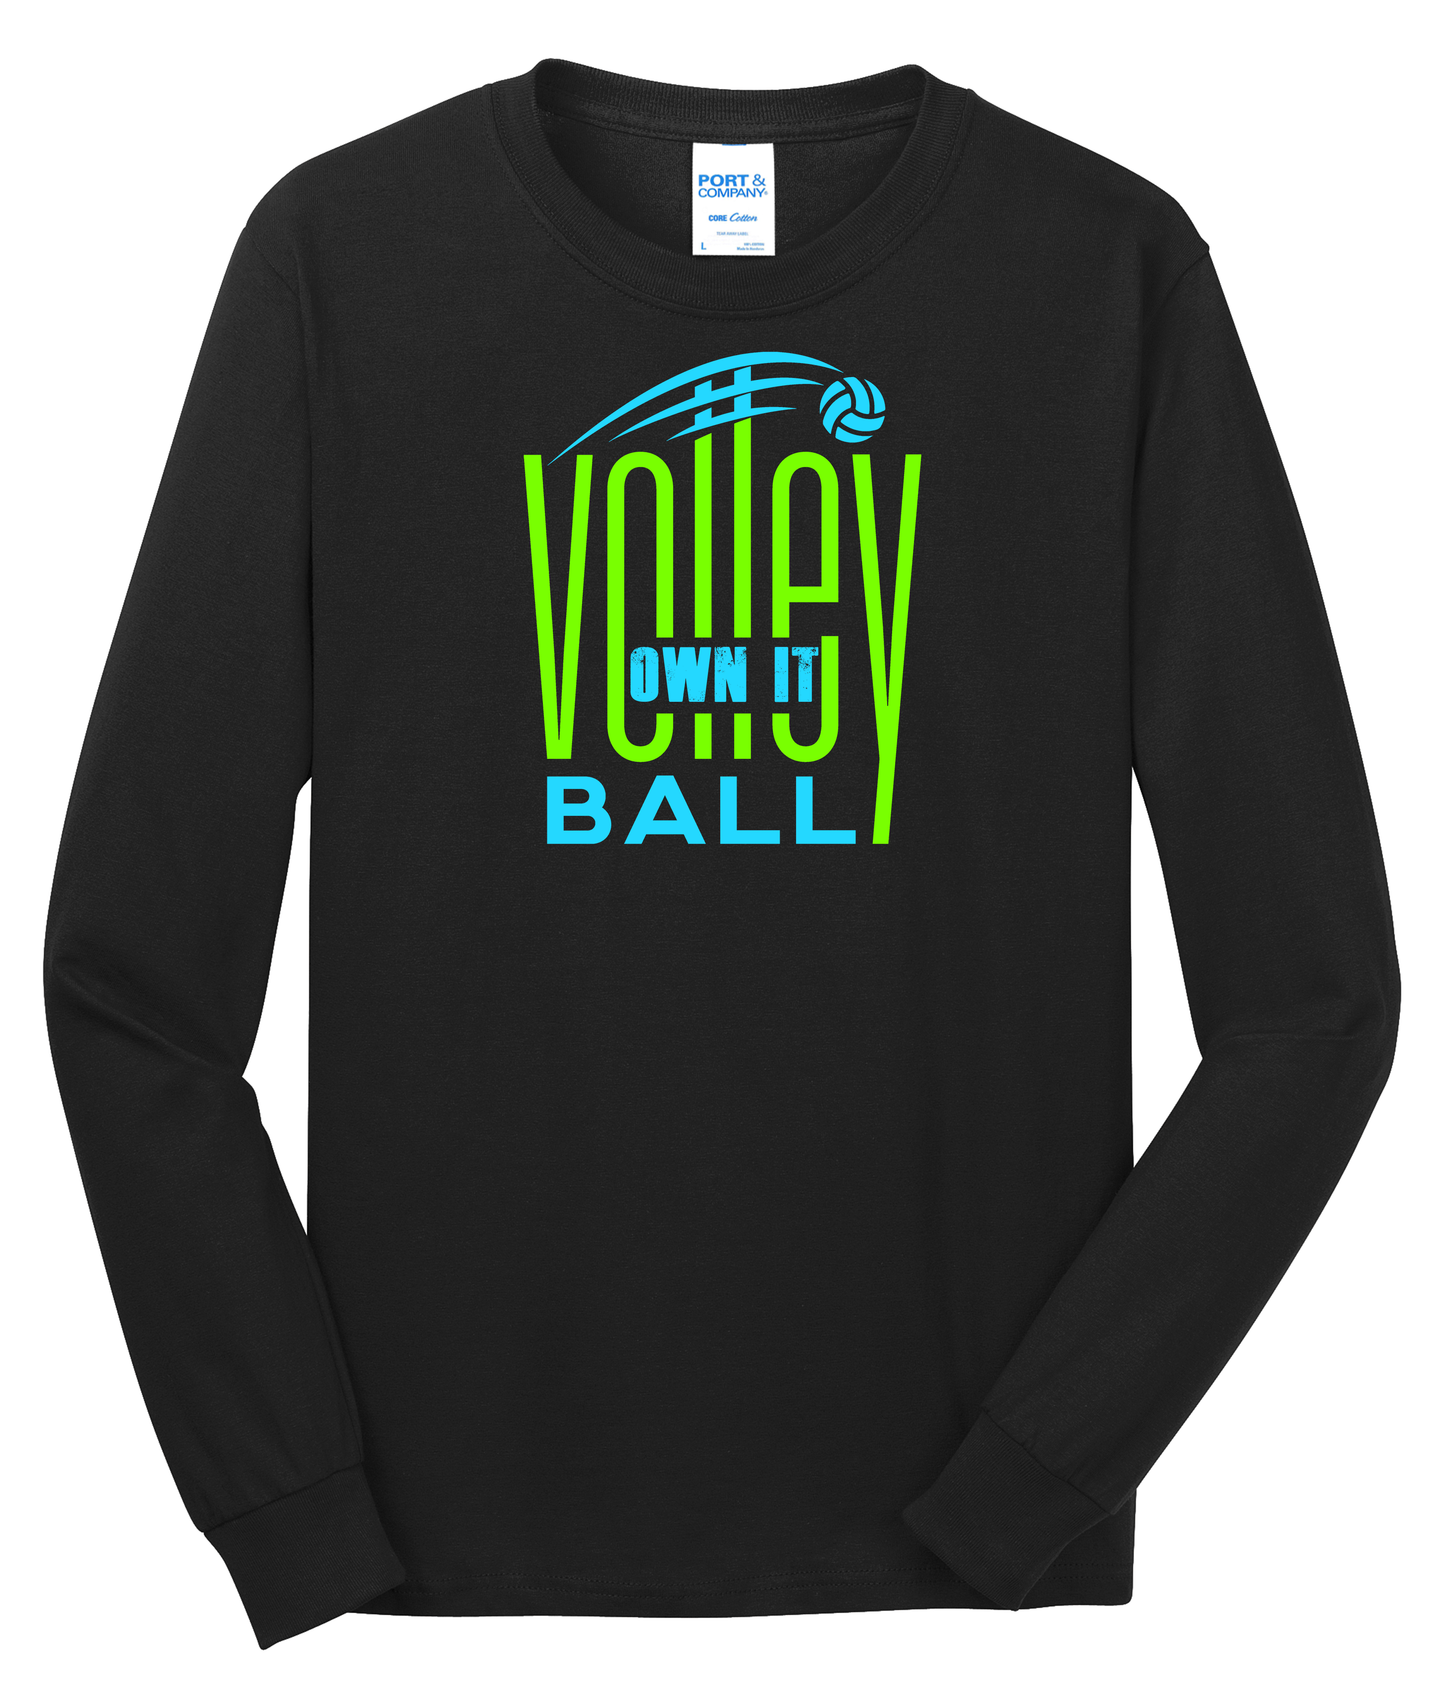 Own It Volleyball Club Long Sleeve Tee (Adult and Youth)